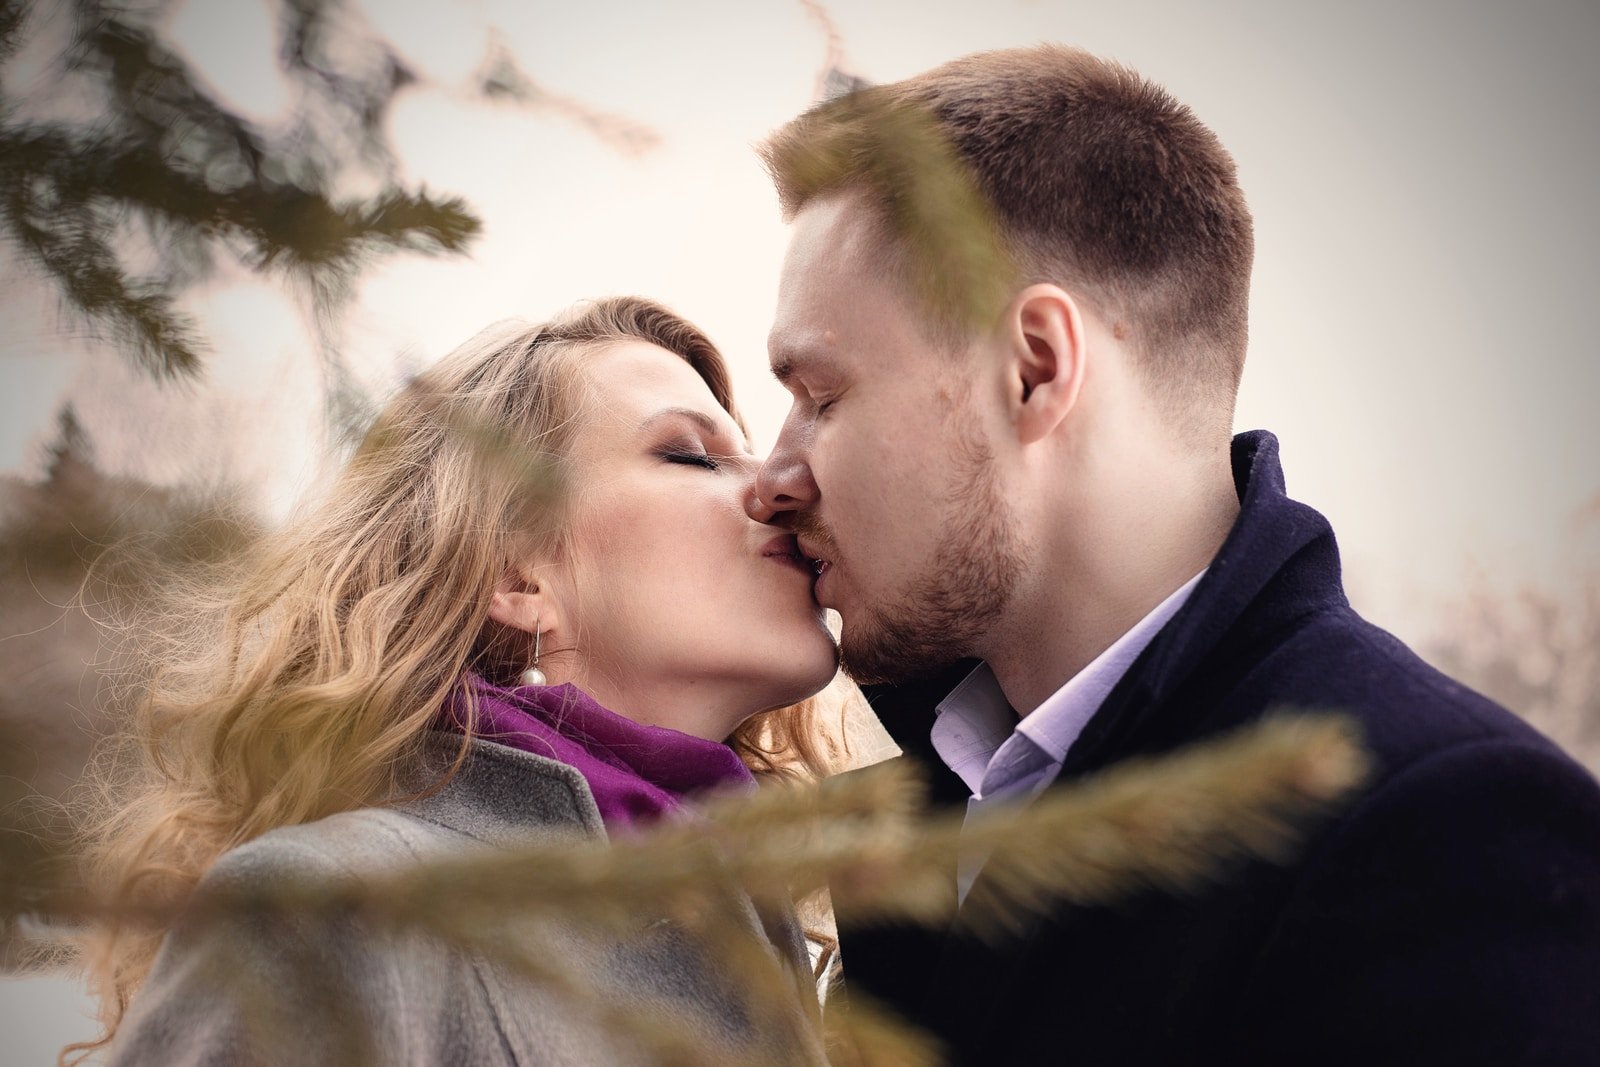 man and woman kissing near green leafed tree